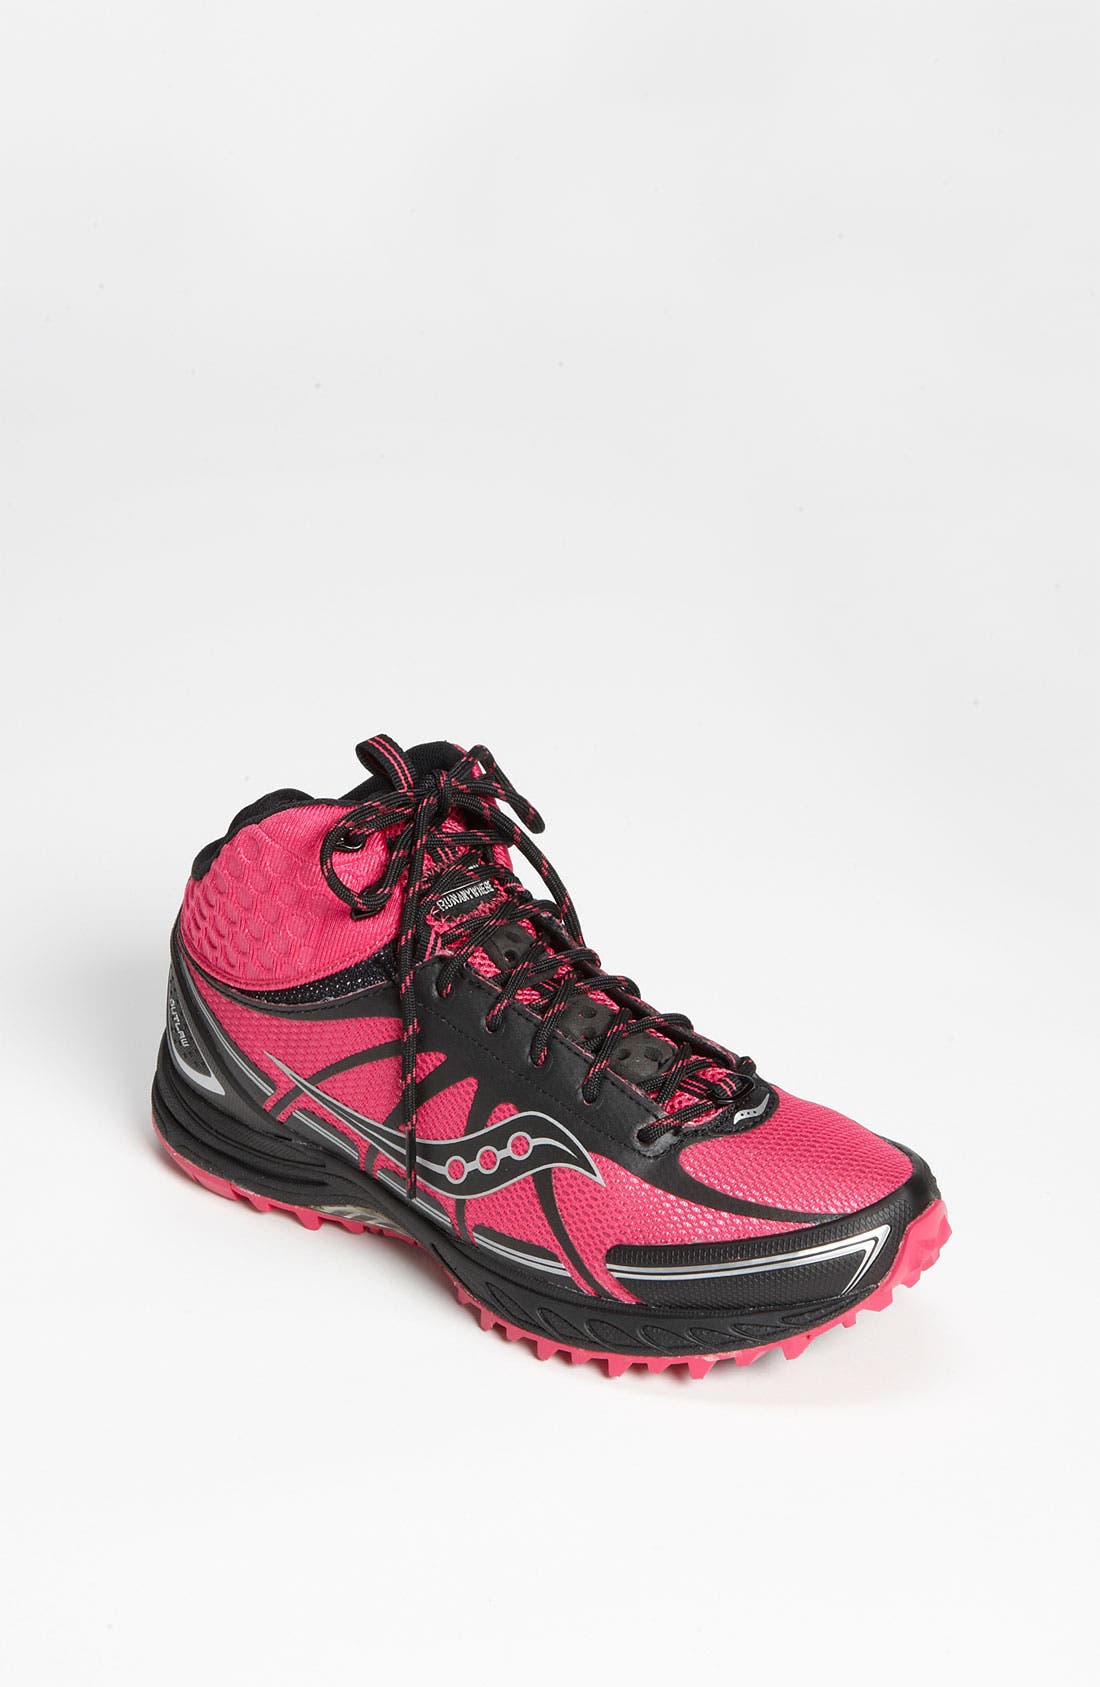 saucony progrid outlaw mens trail running shoes